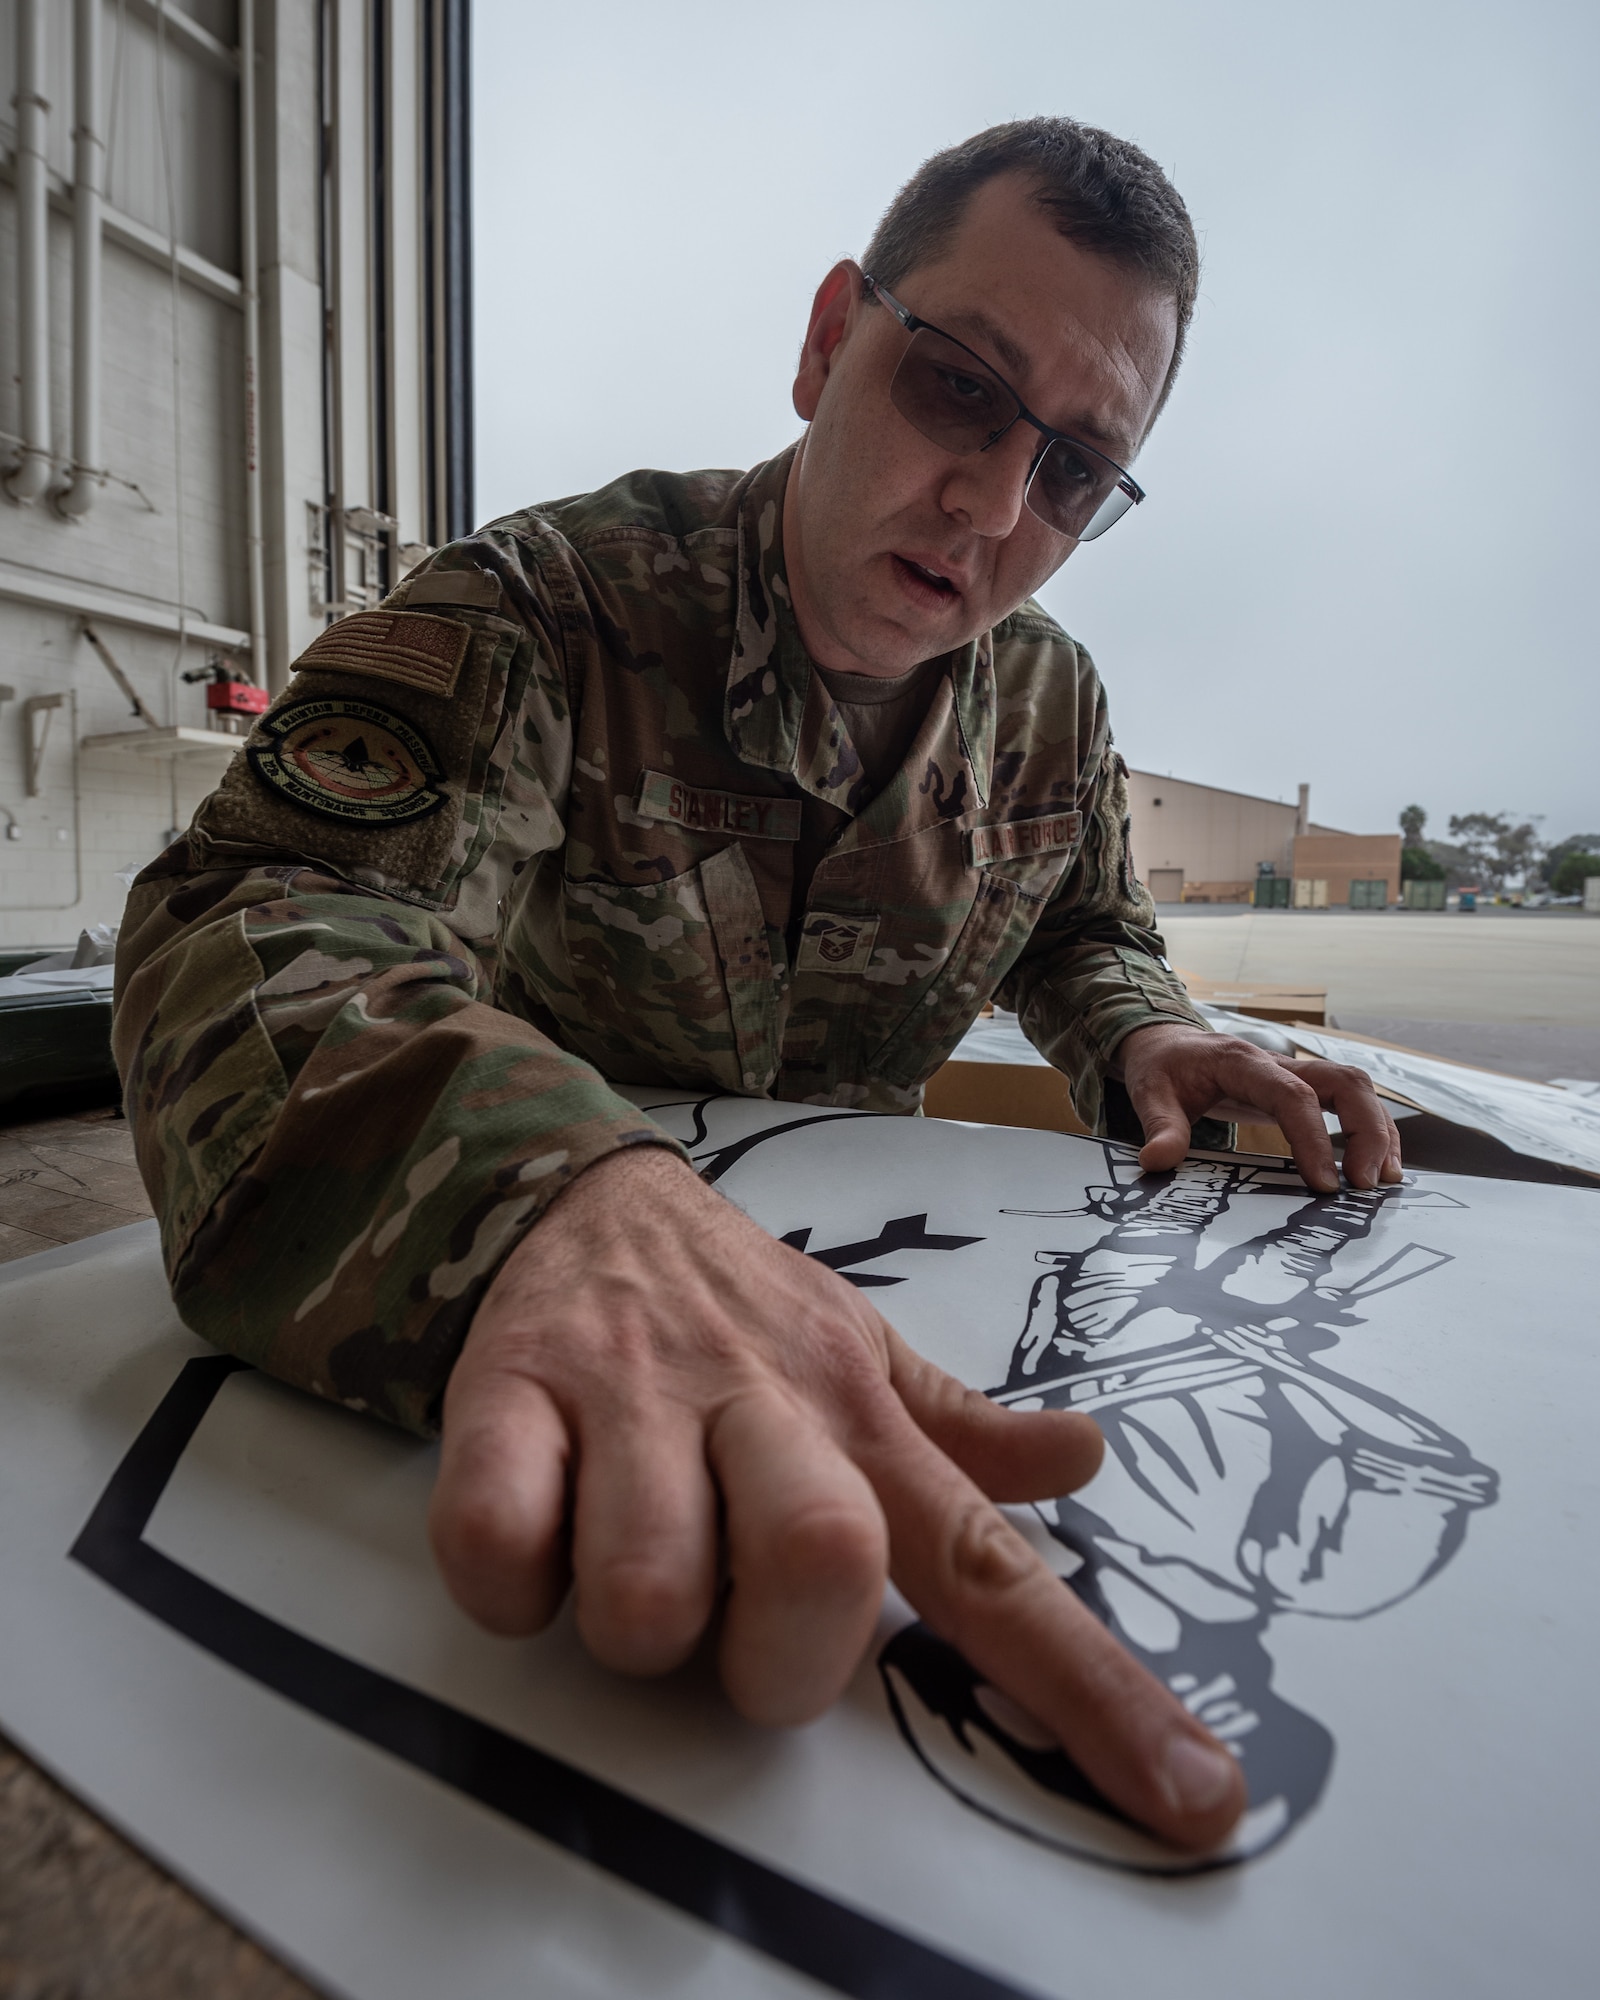 Master Sgt. Lee Stanley, aircraft structural repair shop chief for the 123rd Maintenance Group, prepares an Air National Guard emblem decal to be applied to the tail of one of the Kentucky Air National Guard’s newly acquired C-130J Super Hercules aircraft at Channel Islands Air Guard Station in Port Hueneme, Calif., Nov. 4, 2021. The aircraft will be replacing the C-130H Hercules, which has been in service to the Kentucky Air National Guard since 1992. (U.S. Air National Guard photo by Tech. Sgt. Joshua Horton)